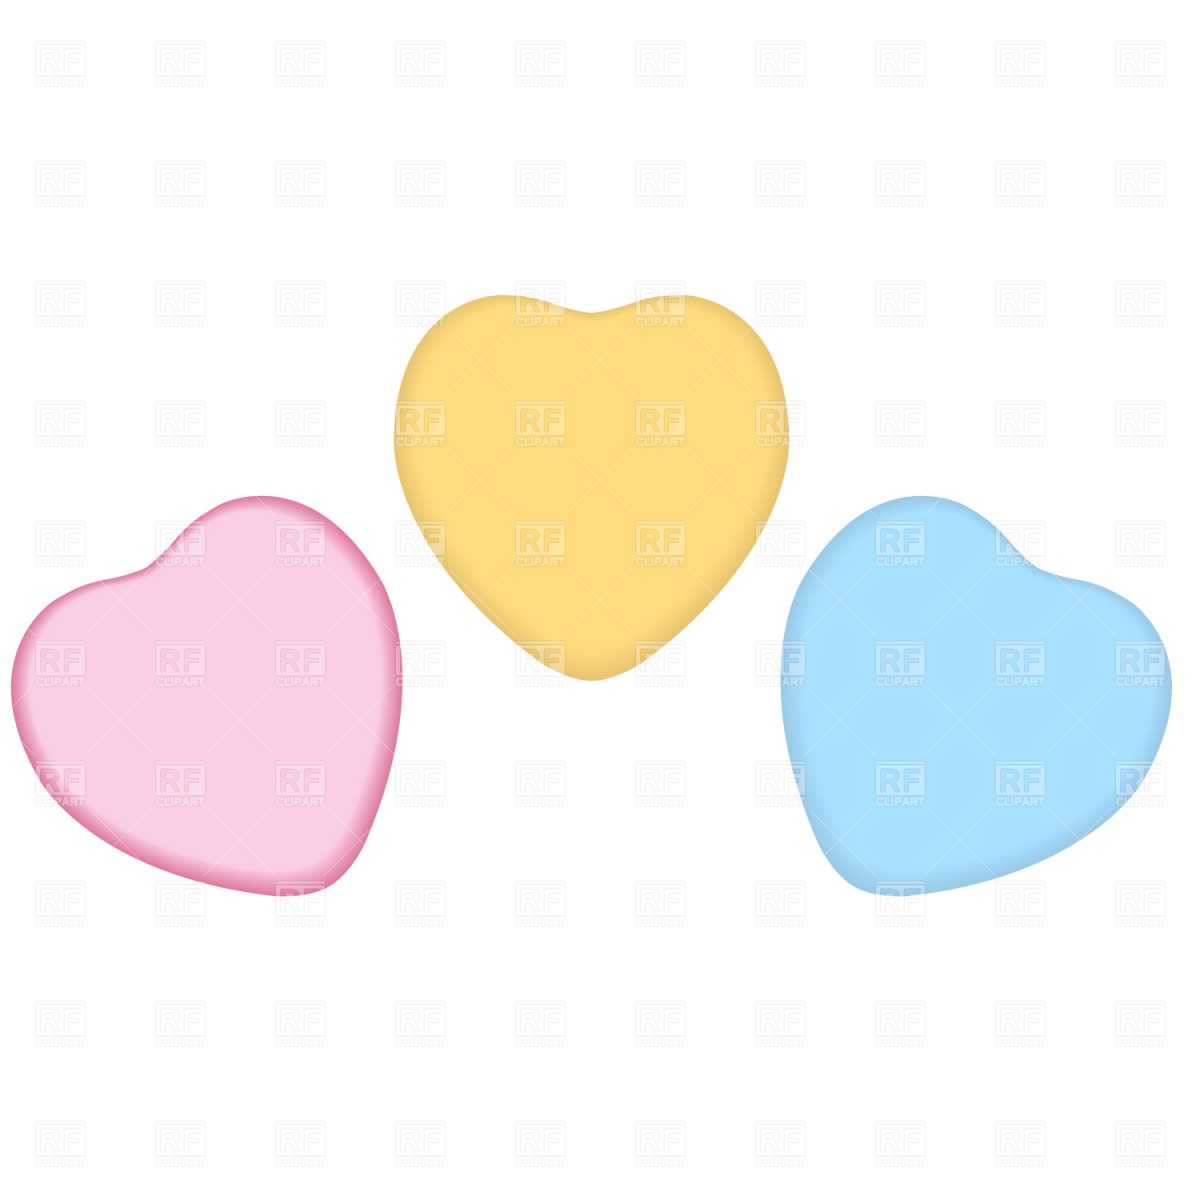 Candy Hearts Clipart.